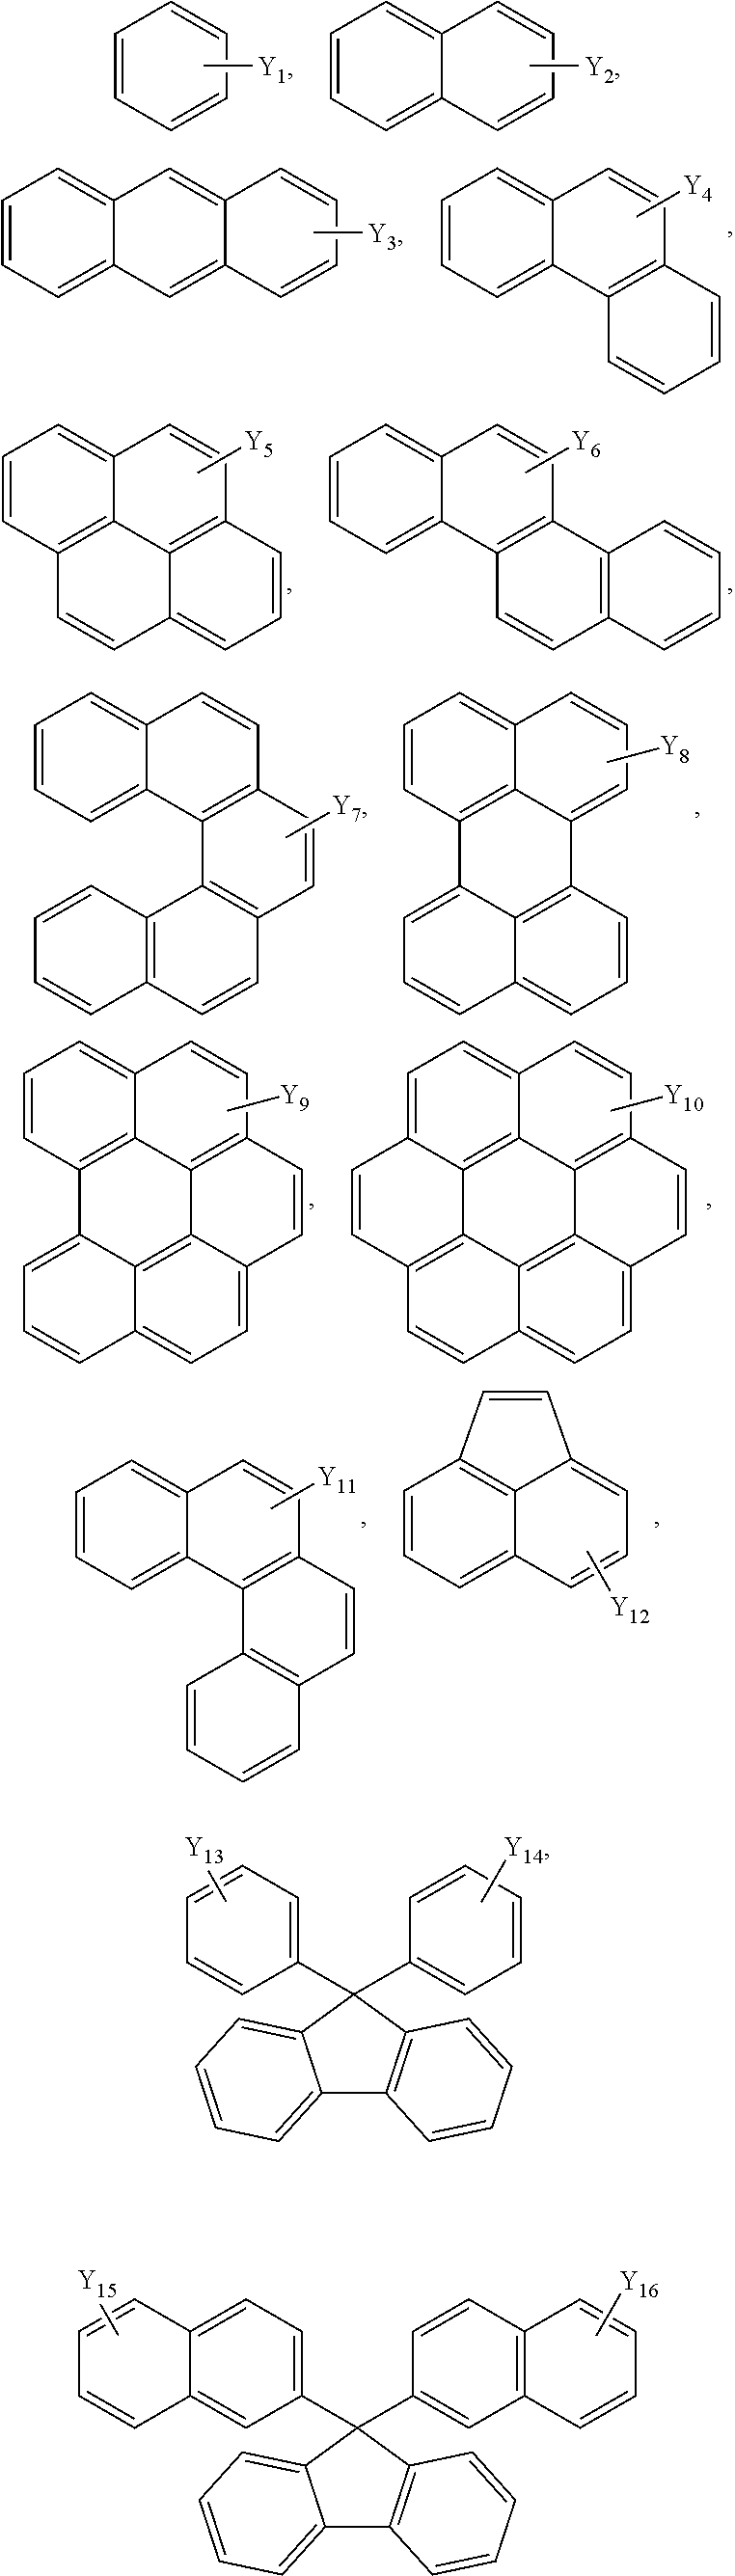 Hardmask composition, method of forming a pattern using the same, and semiconductor integrated circuit device including the pattern